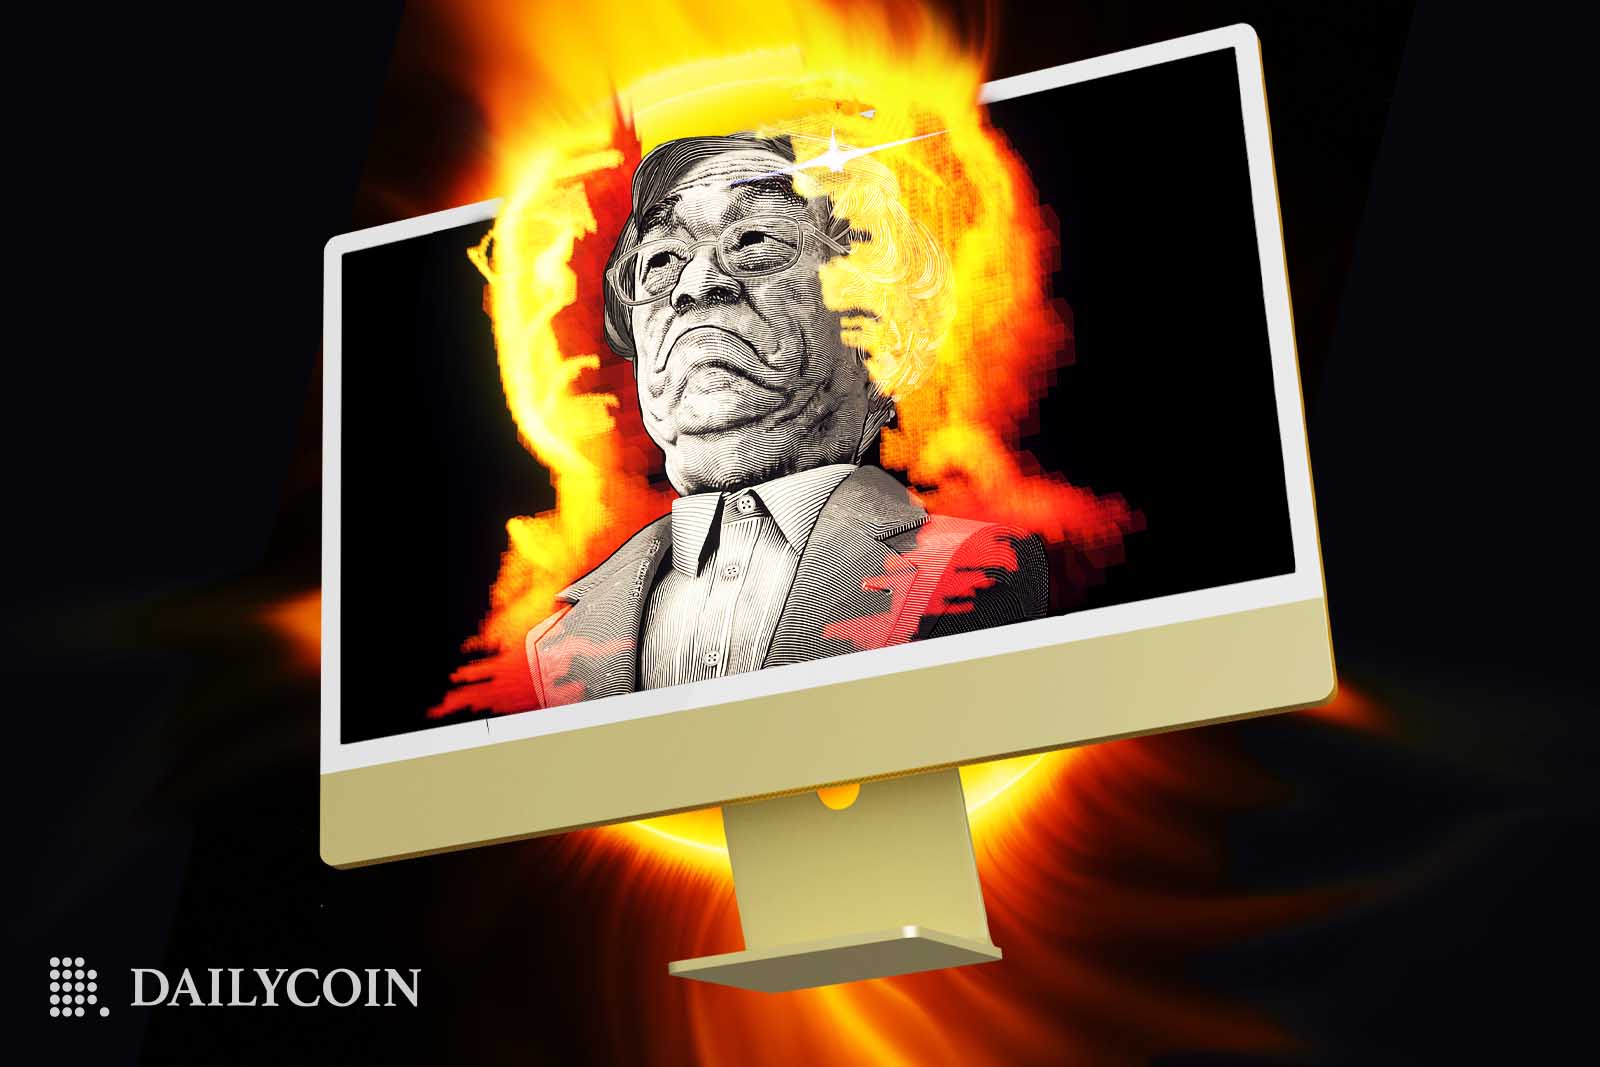 The flaming head of Bitcoins pseudonym creator Satoshi Nakamoto appearing on the screen of an Apple computer